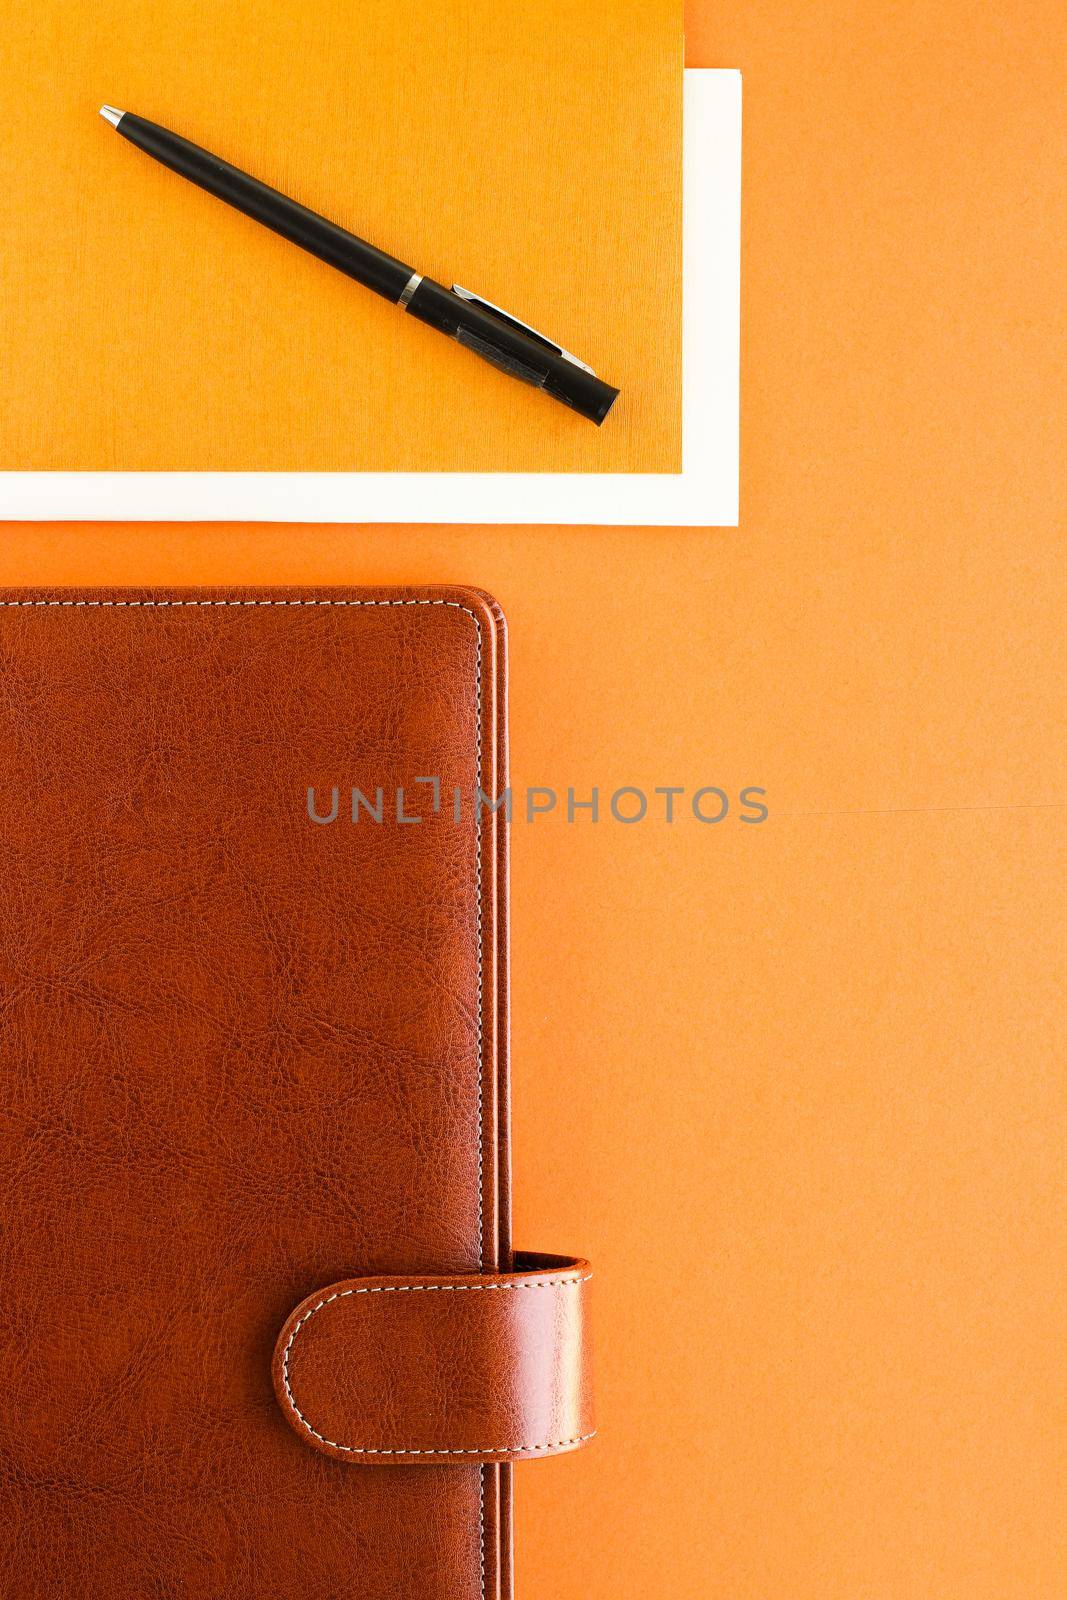 Modern workspace, productivity and corporate lifestyle concept - Luxury business brown brief-case on the office table desk, flatlay